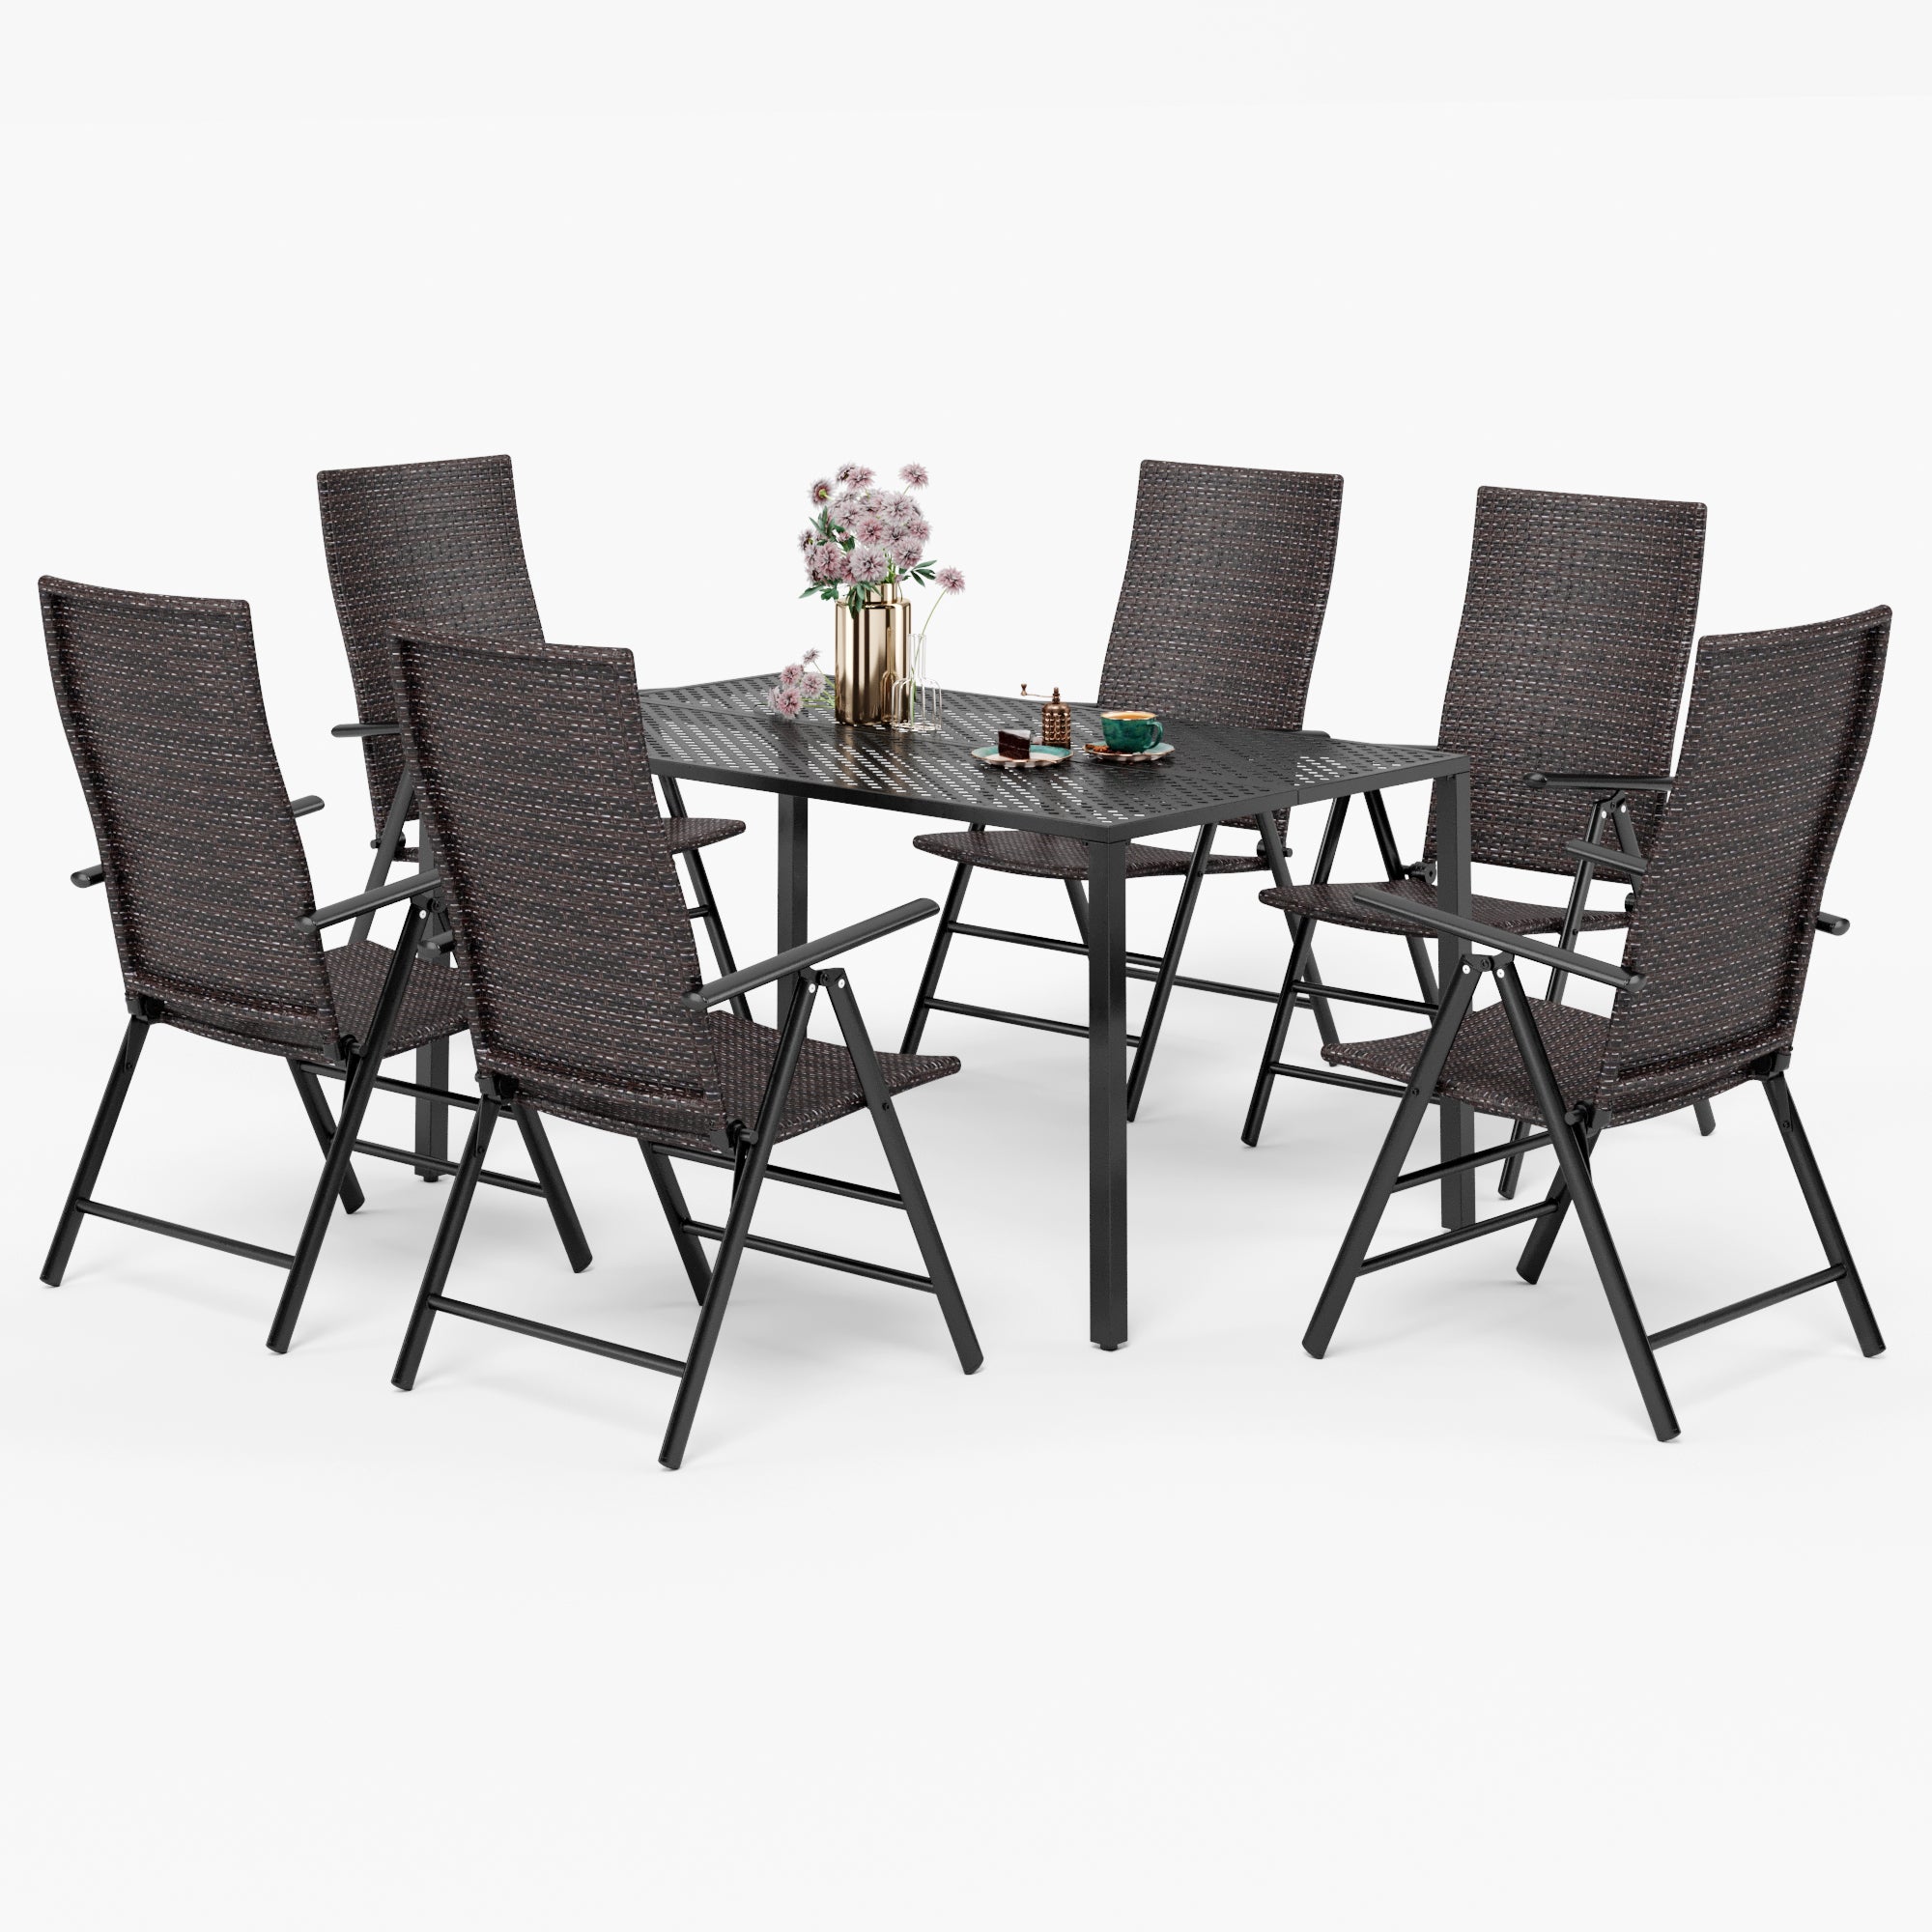 MFSTUDIO 7-Piece Rectangle Mesh Table & Rattan Adjustable Reclining Foldable Chairs Outdoor Dining Set